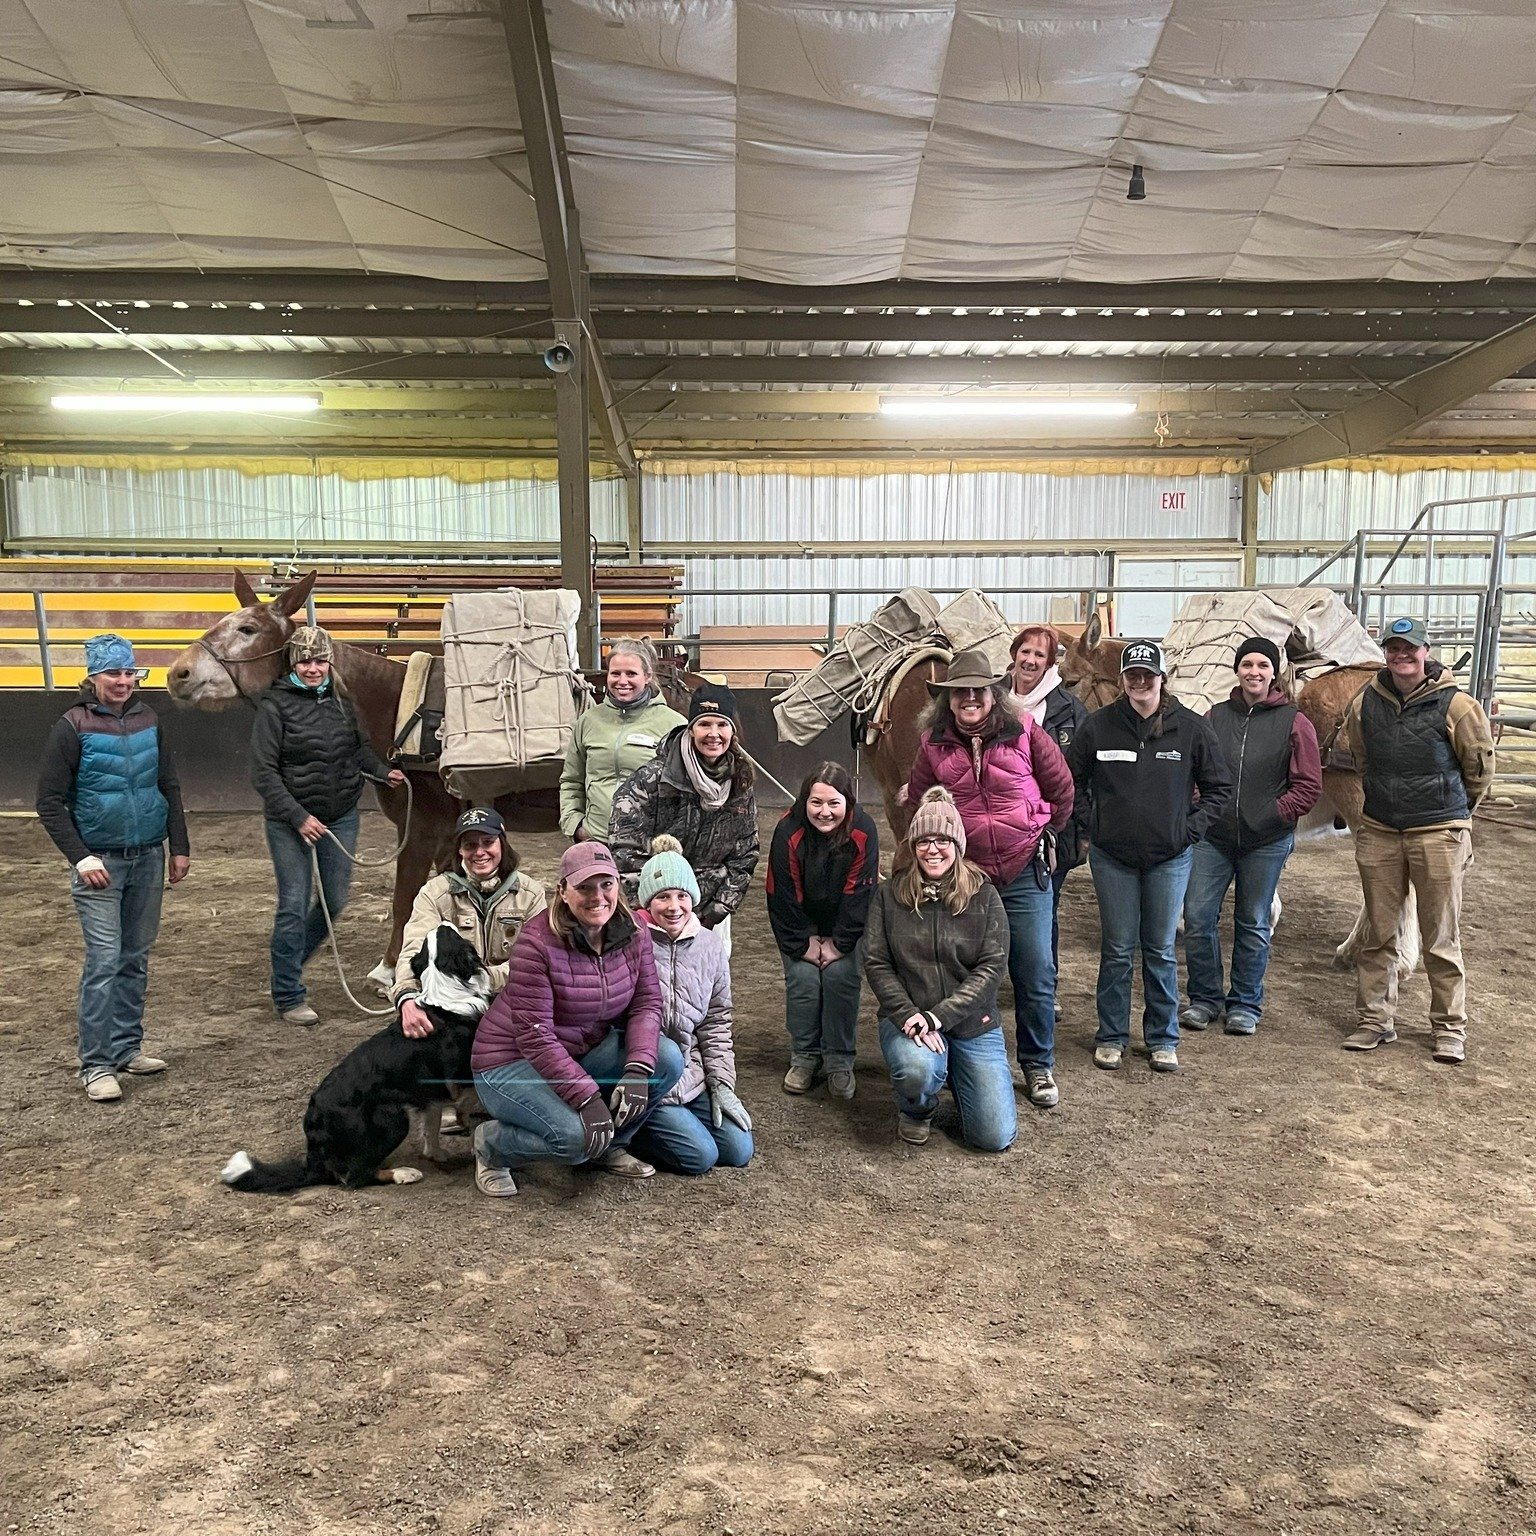 Our first Women's Packing Clinics happened this weekend in Choteau! We were honored to have 23 women join us from all across the state to build their skills, knowledge and confidence for bringing pack stock into the Bob (or any wild place). 

So much